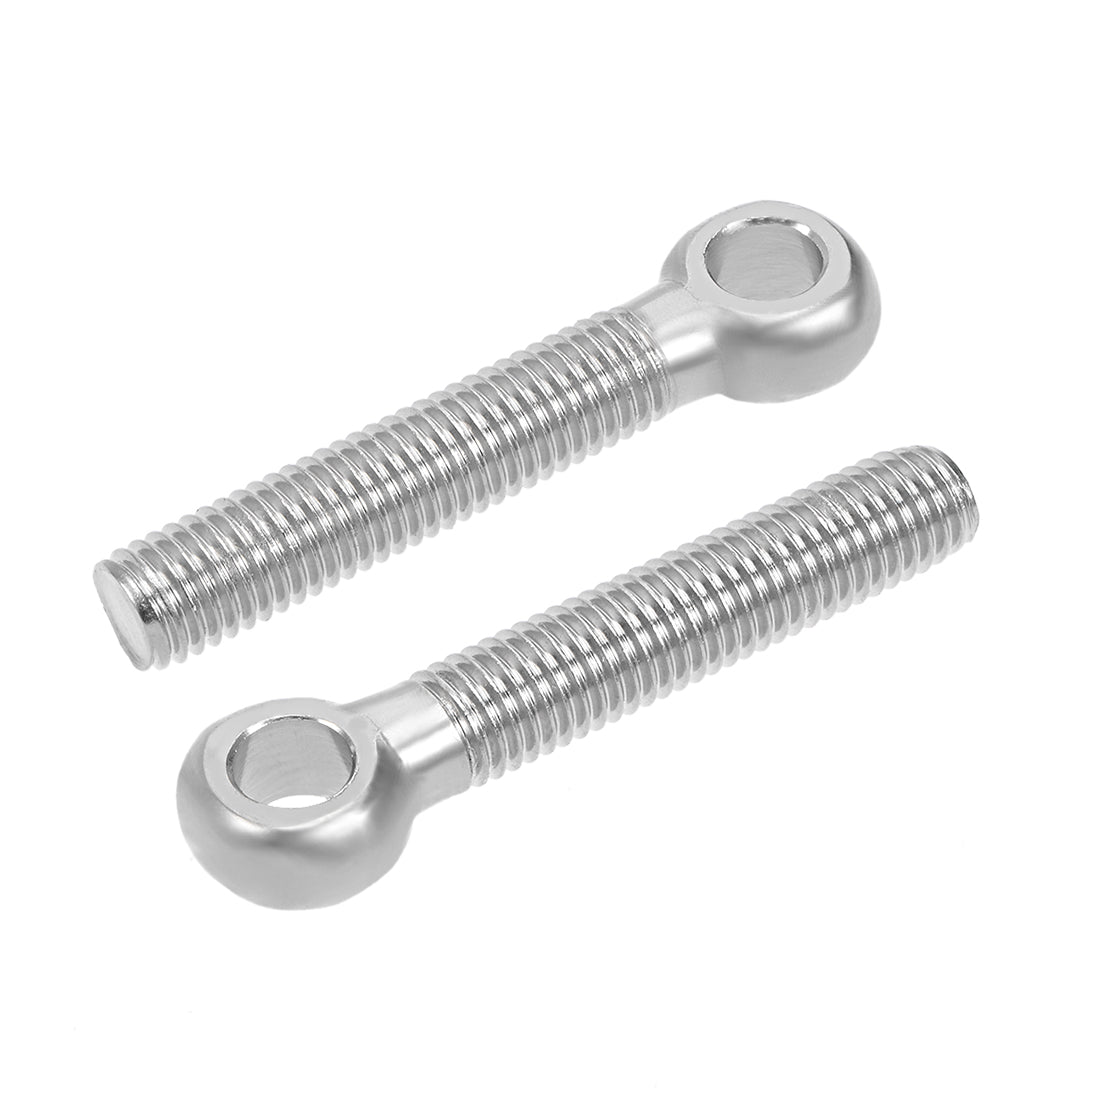 Uxcell Uxcell M12 x 70mm 304 Stainless Steel Machine Shoulder Lift Eye Bolt Rigging 5pcs Silver Tone